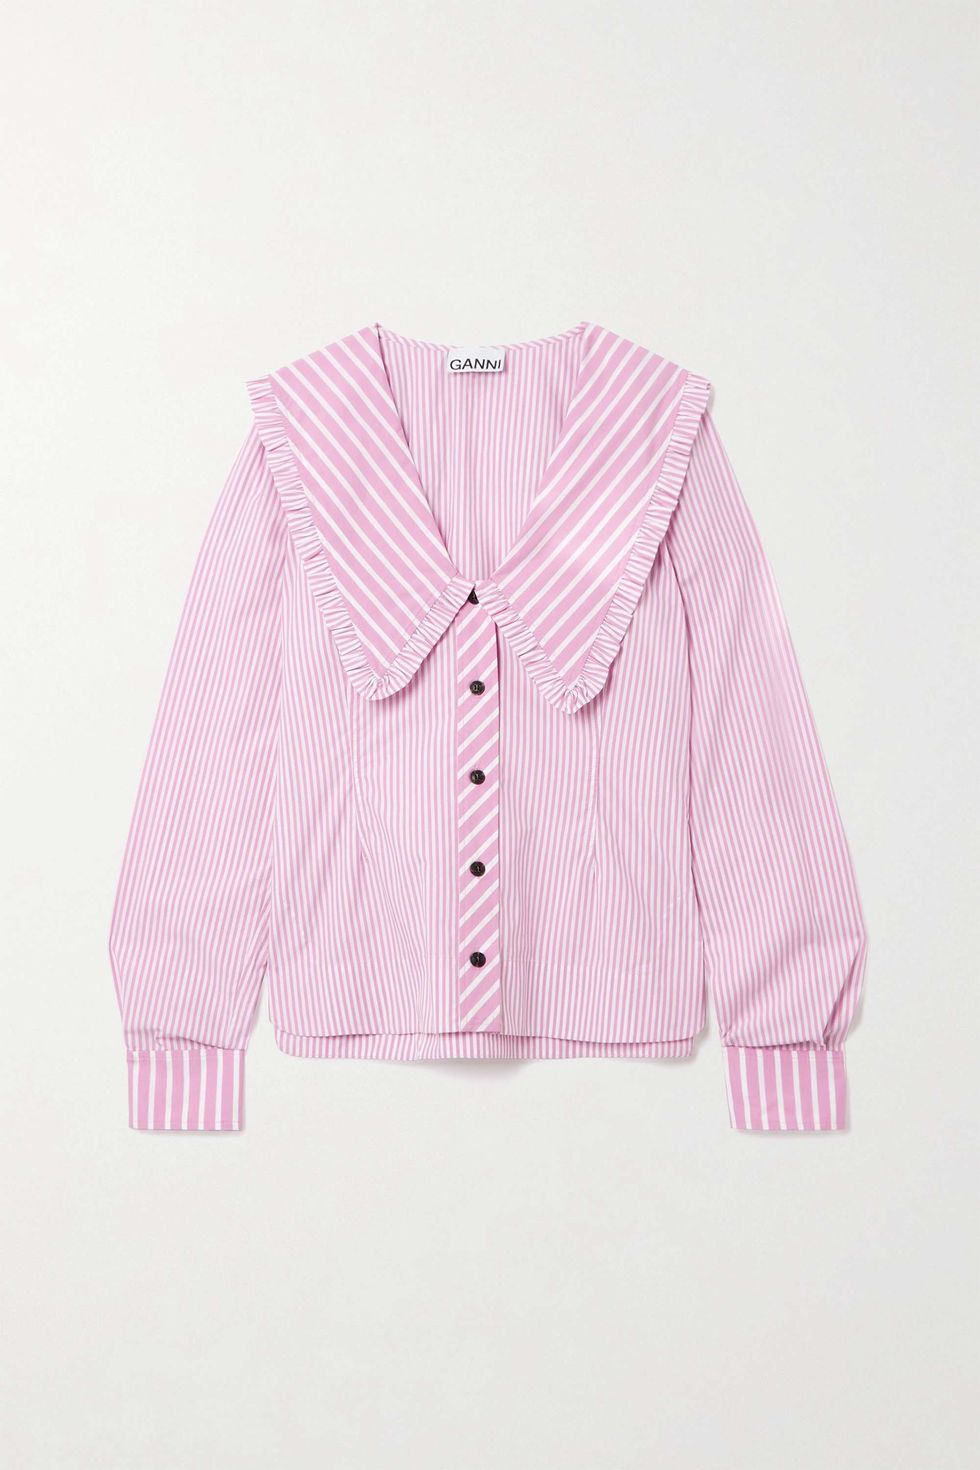 Kate Middleton's Pink Gingham Chelsea Collar Shirt from Brora